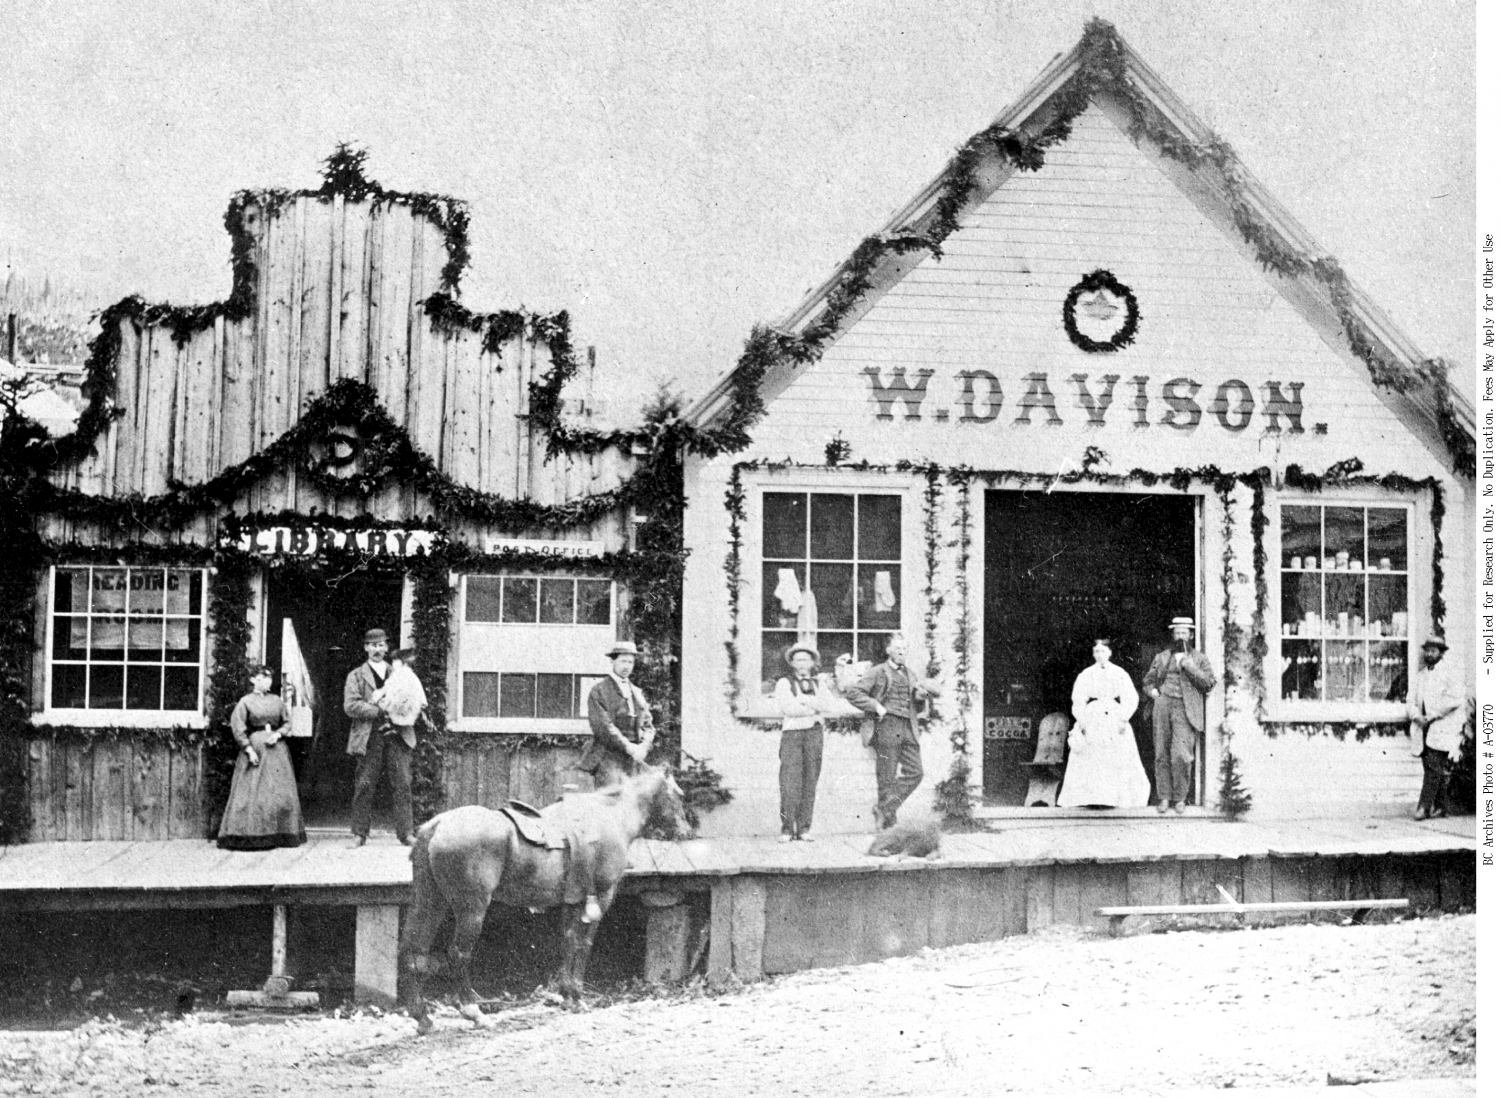 Barkerville Library with Mr. and Mrs. John Bowron in the doorway. Mr. and Mrs. W. Davison in door of grocery shop. Taken in 1871.
